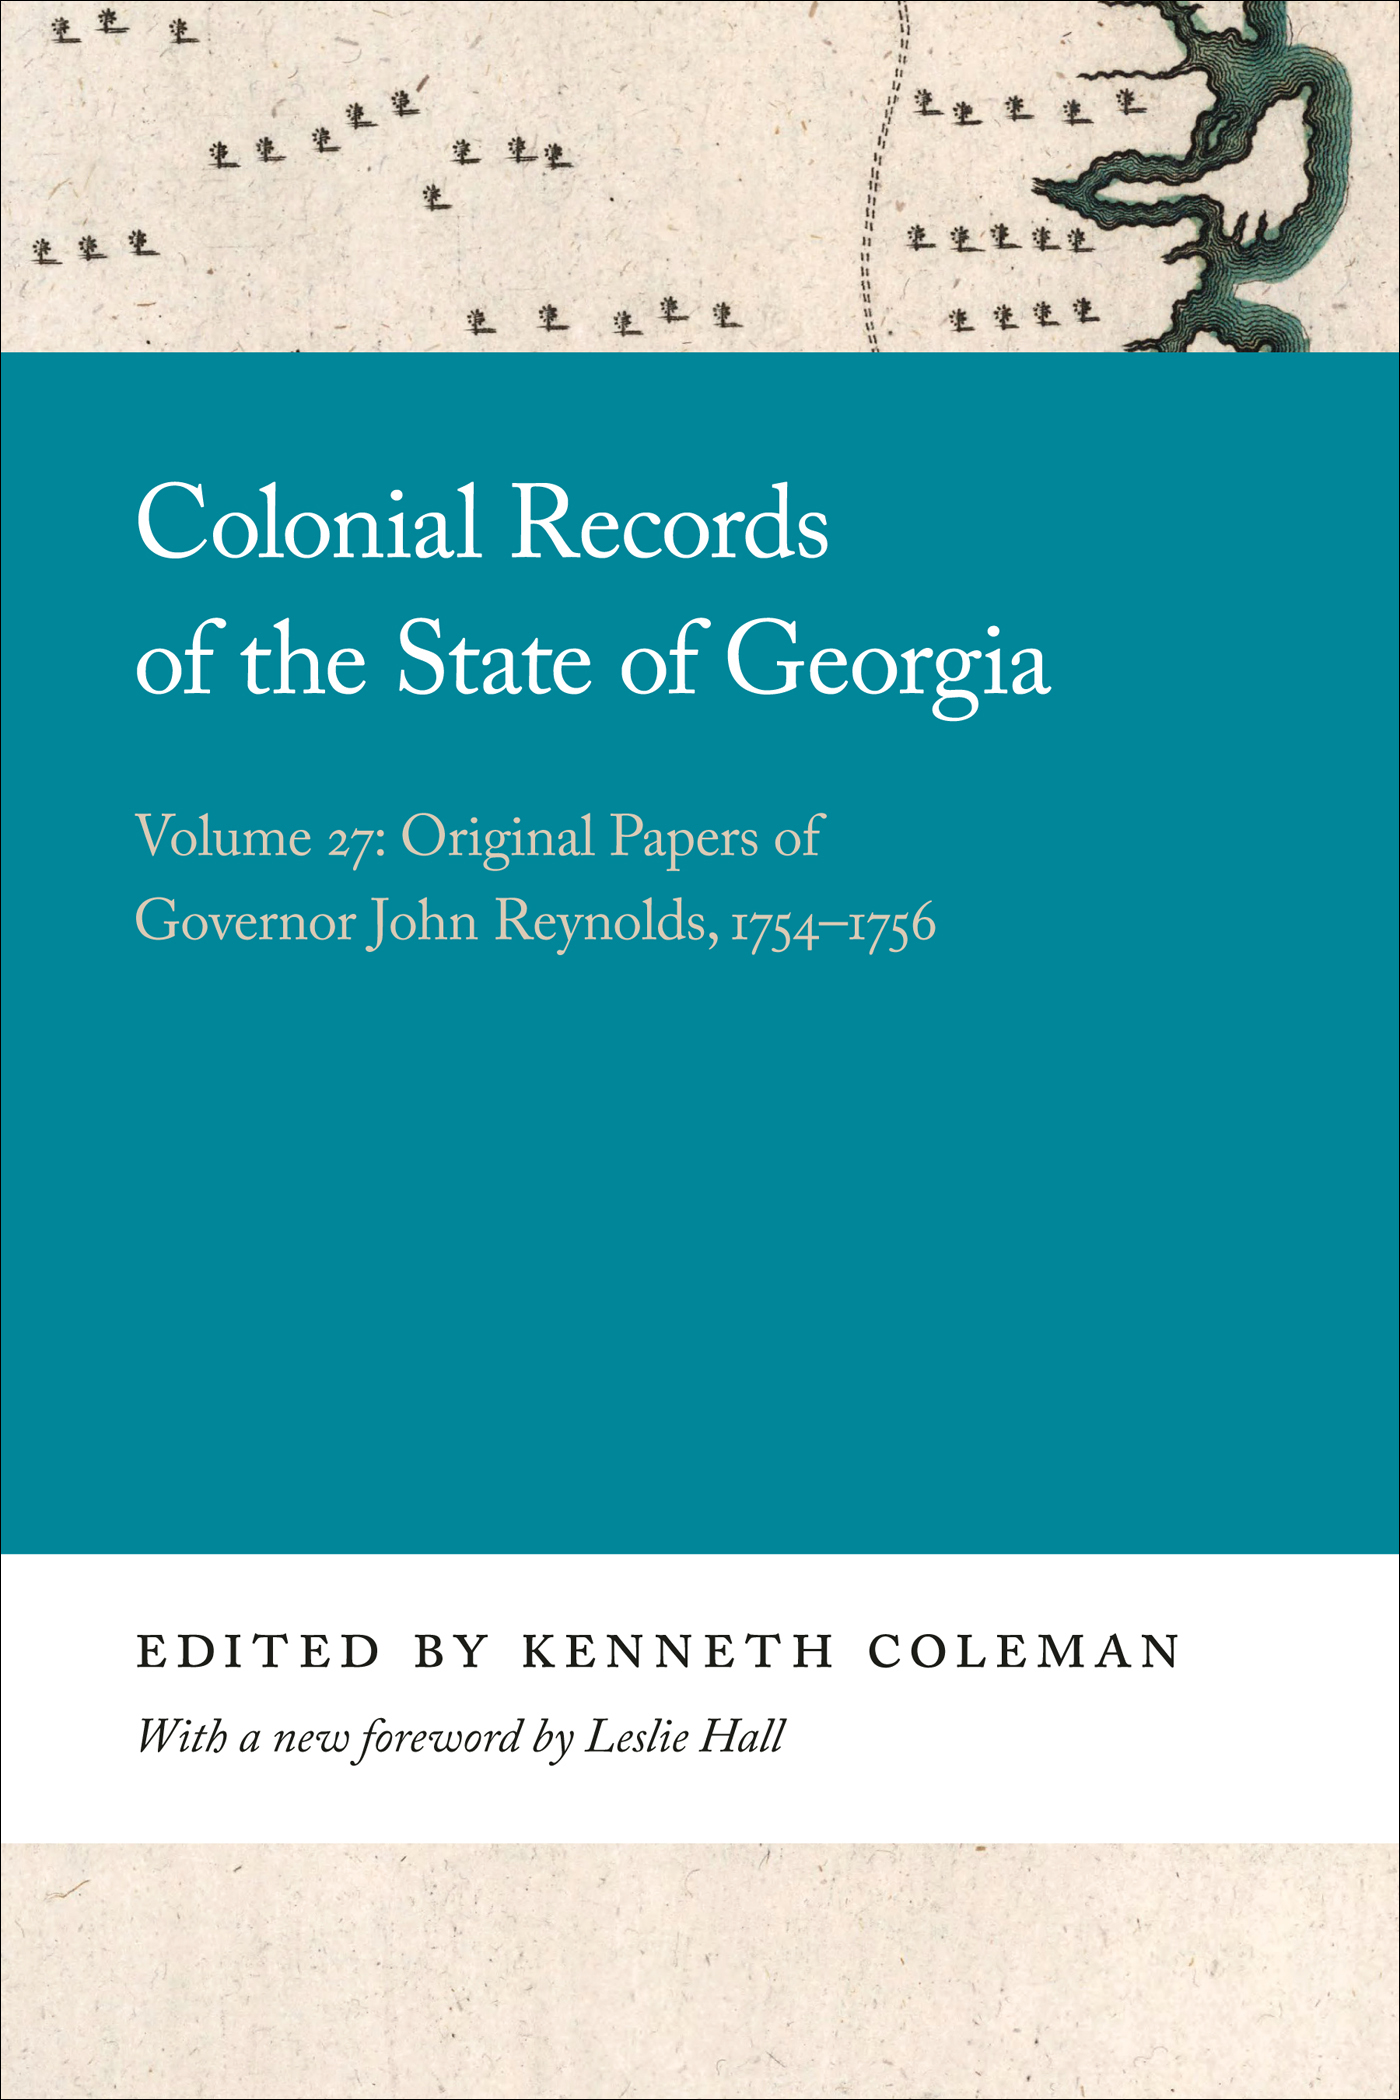 Cover of, Colonial records of the State of Georgia, volume 27 : original papers of Governor John Reynolds, 1754 to 1756.